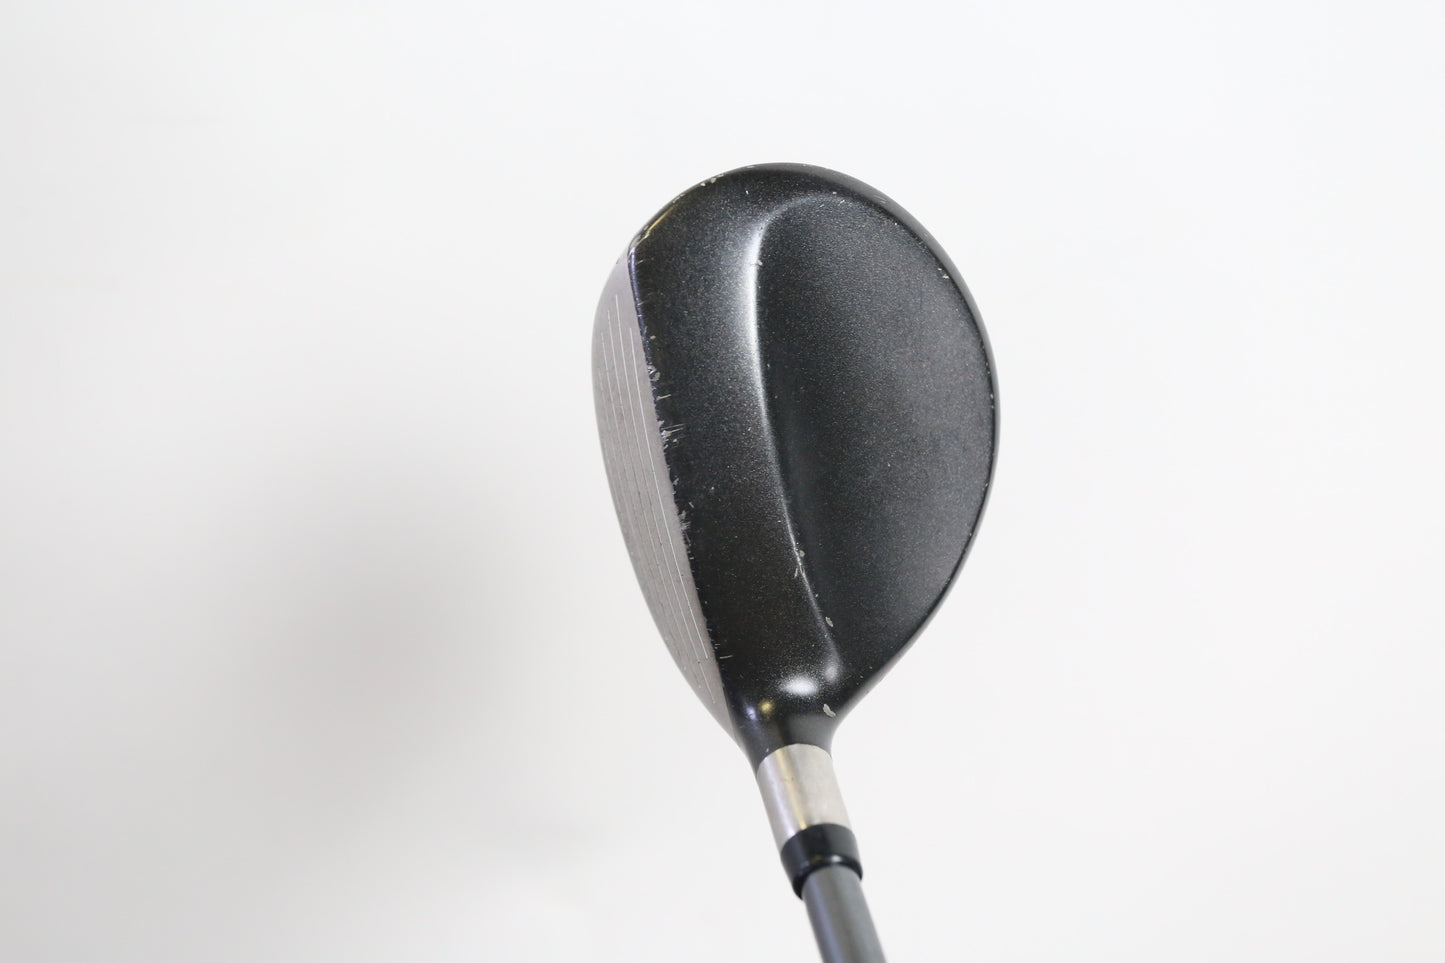 Used Cleveland HiBore 5-Wood - Right-Handed - 18 Degrees - Ladies Flex